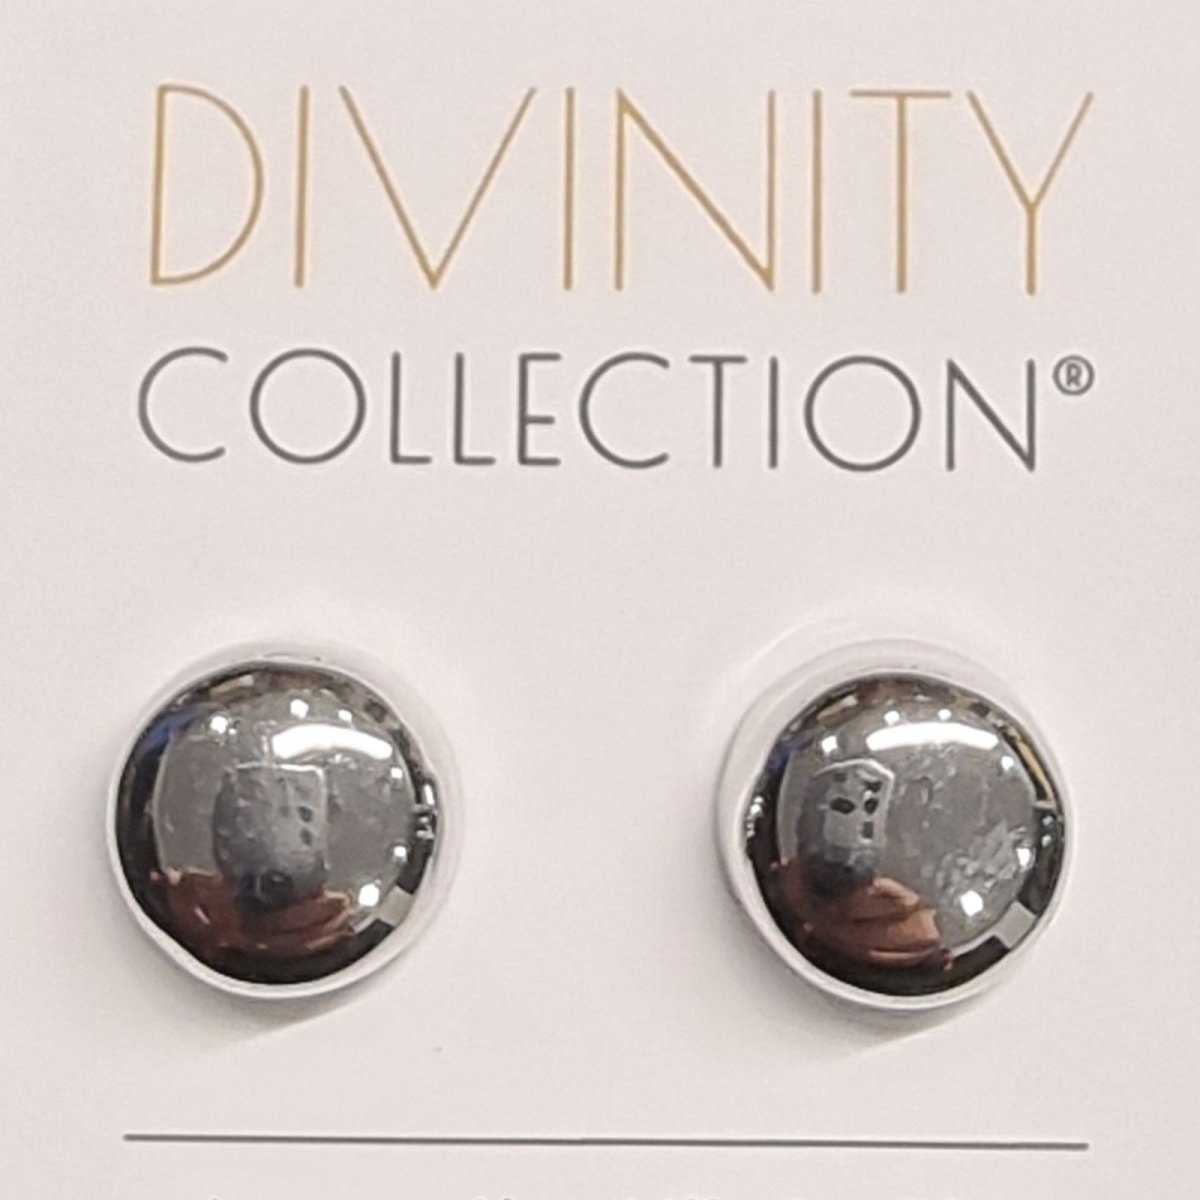 2 Pairs Magnetic Hijab Metallic Pins - Silver - Divinity Collection